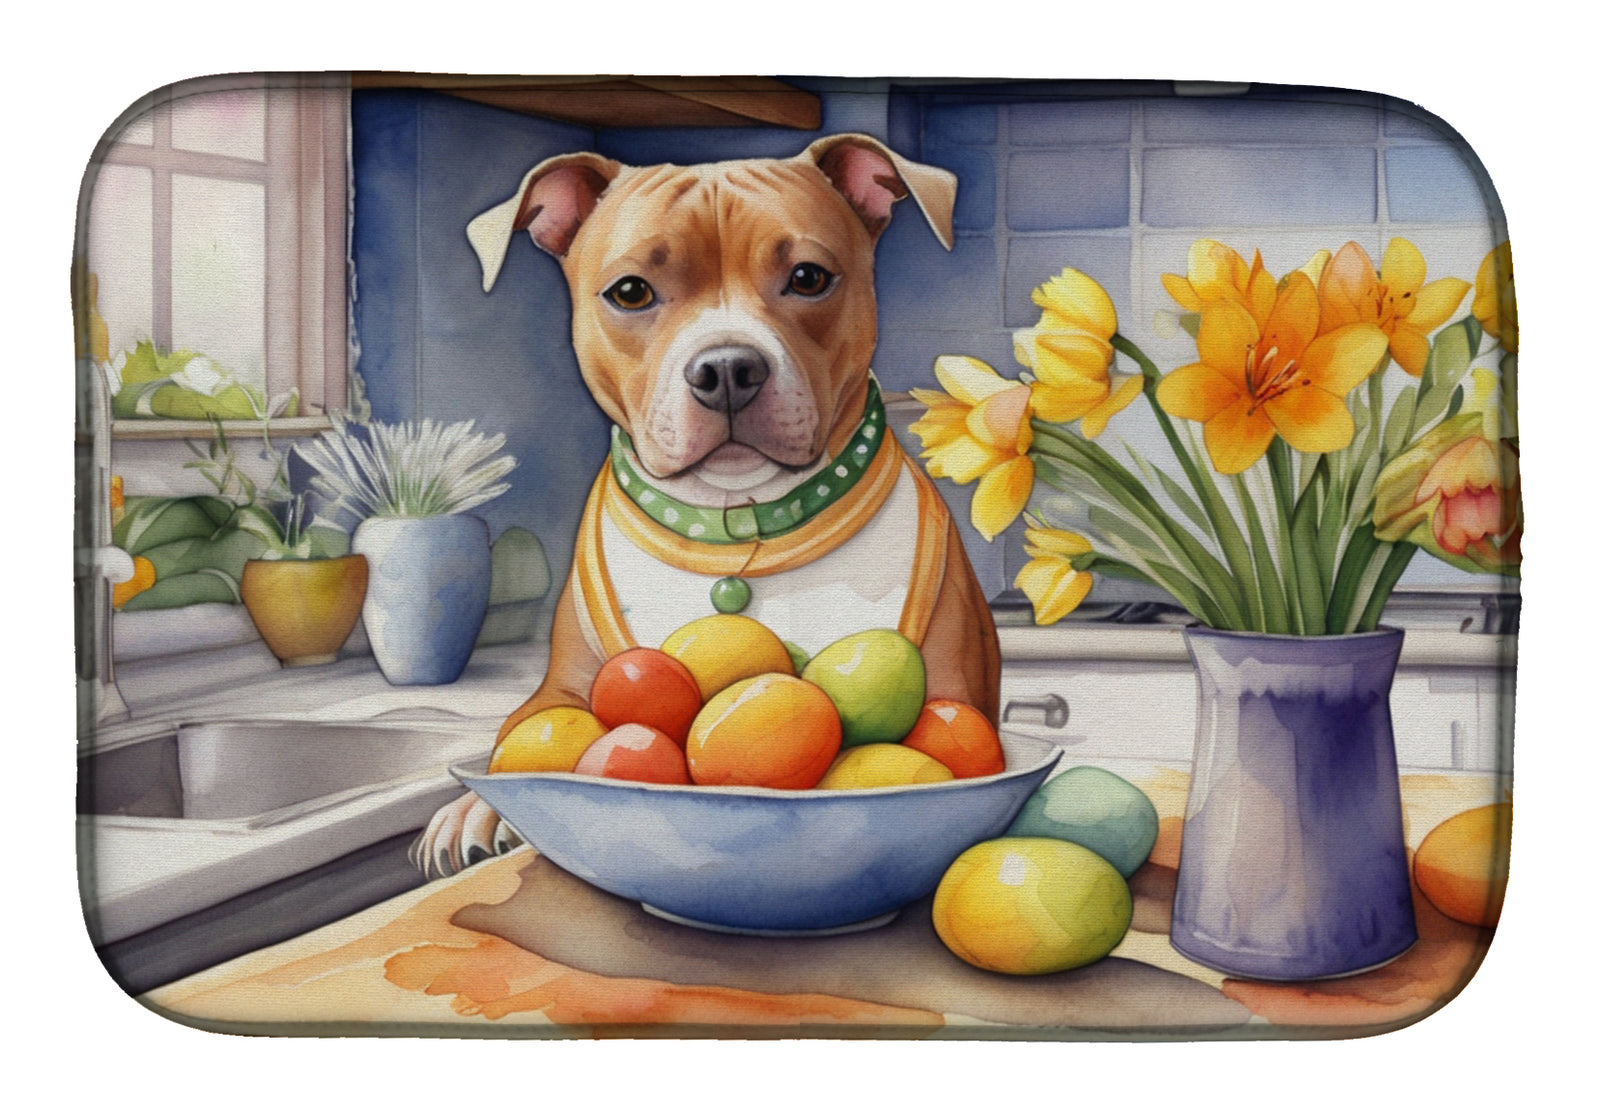 Buy this Decorating Easter Staffordshire Bull Terrier Dish Drying Mat